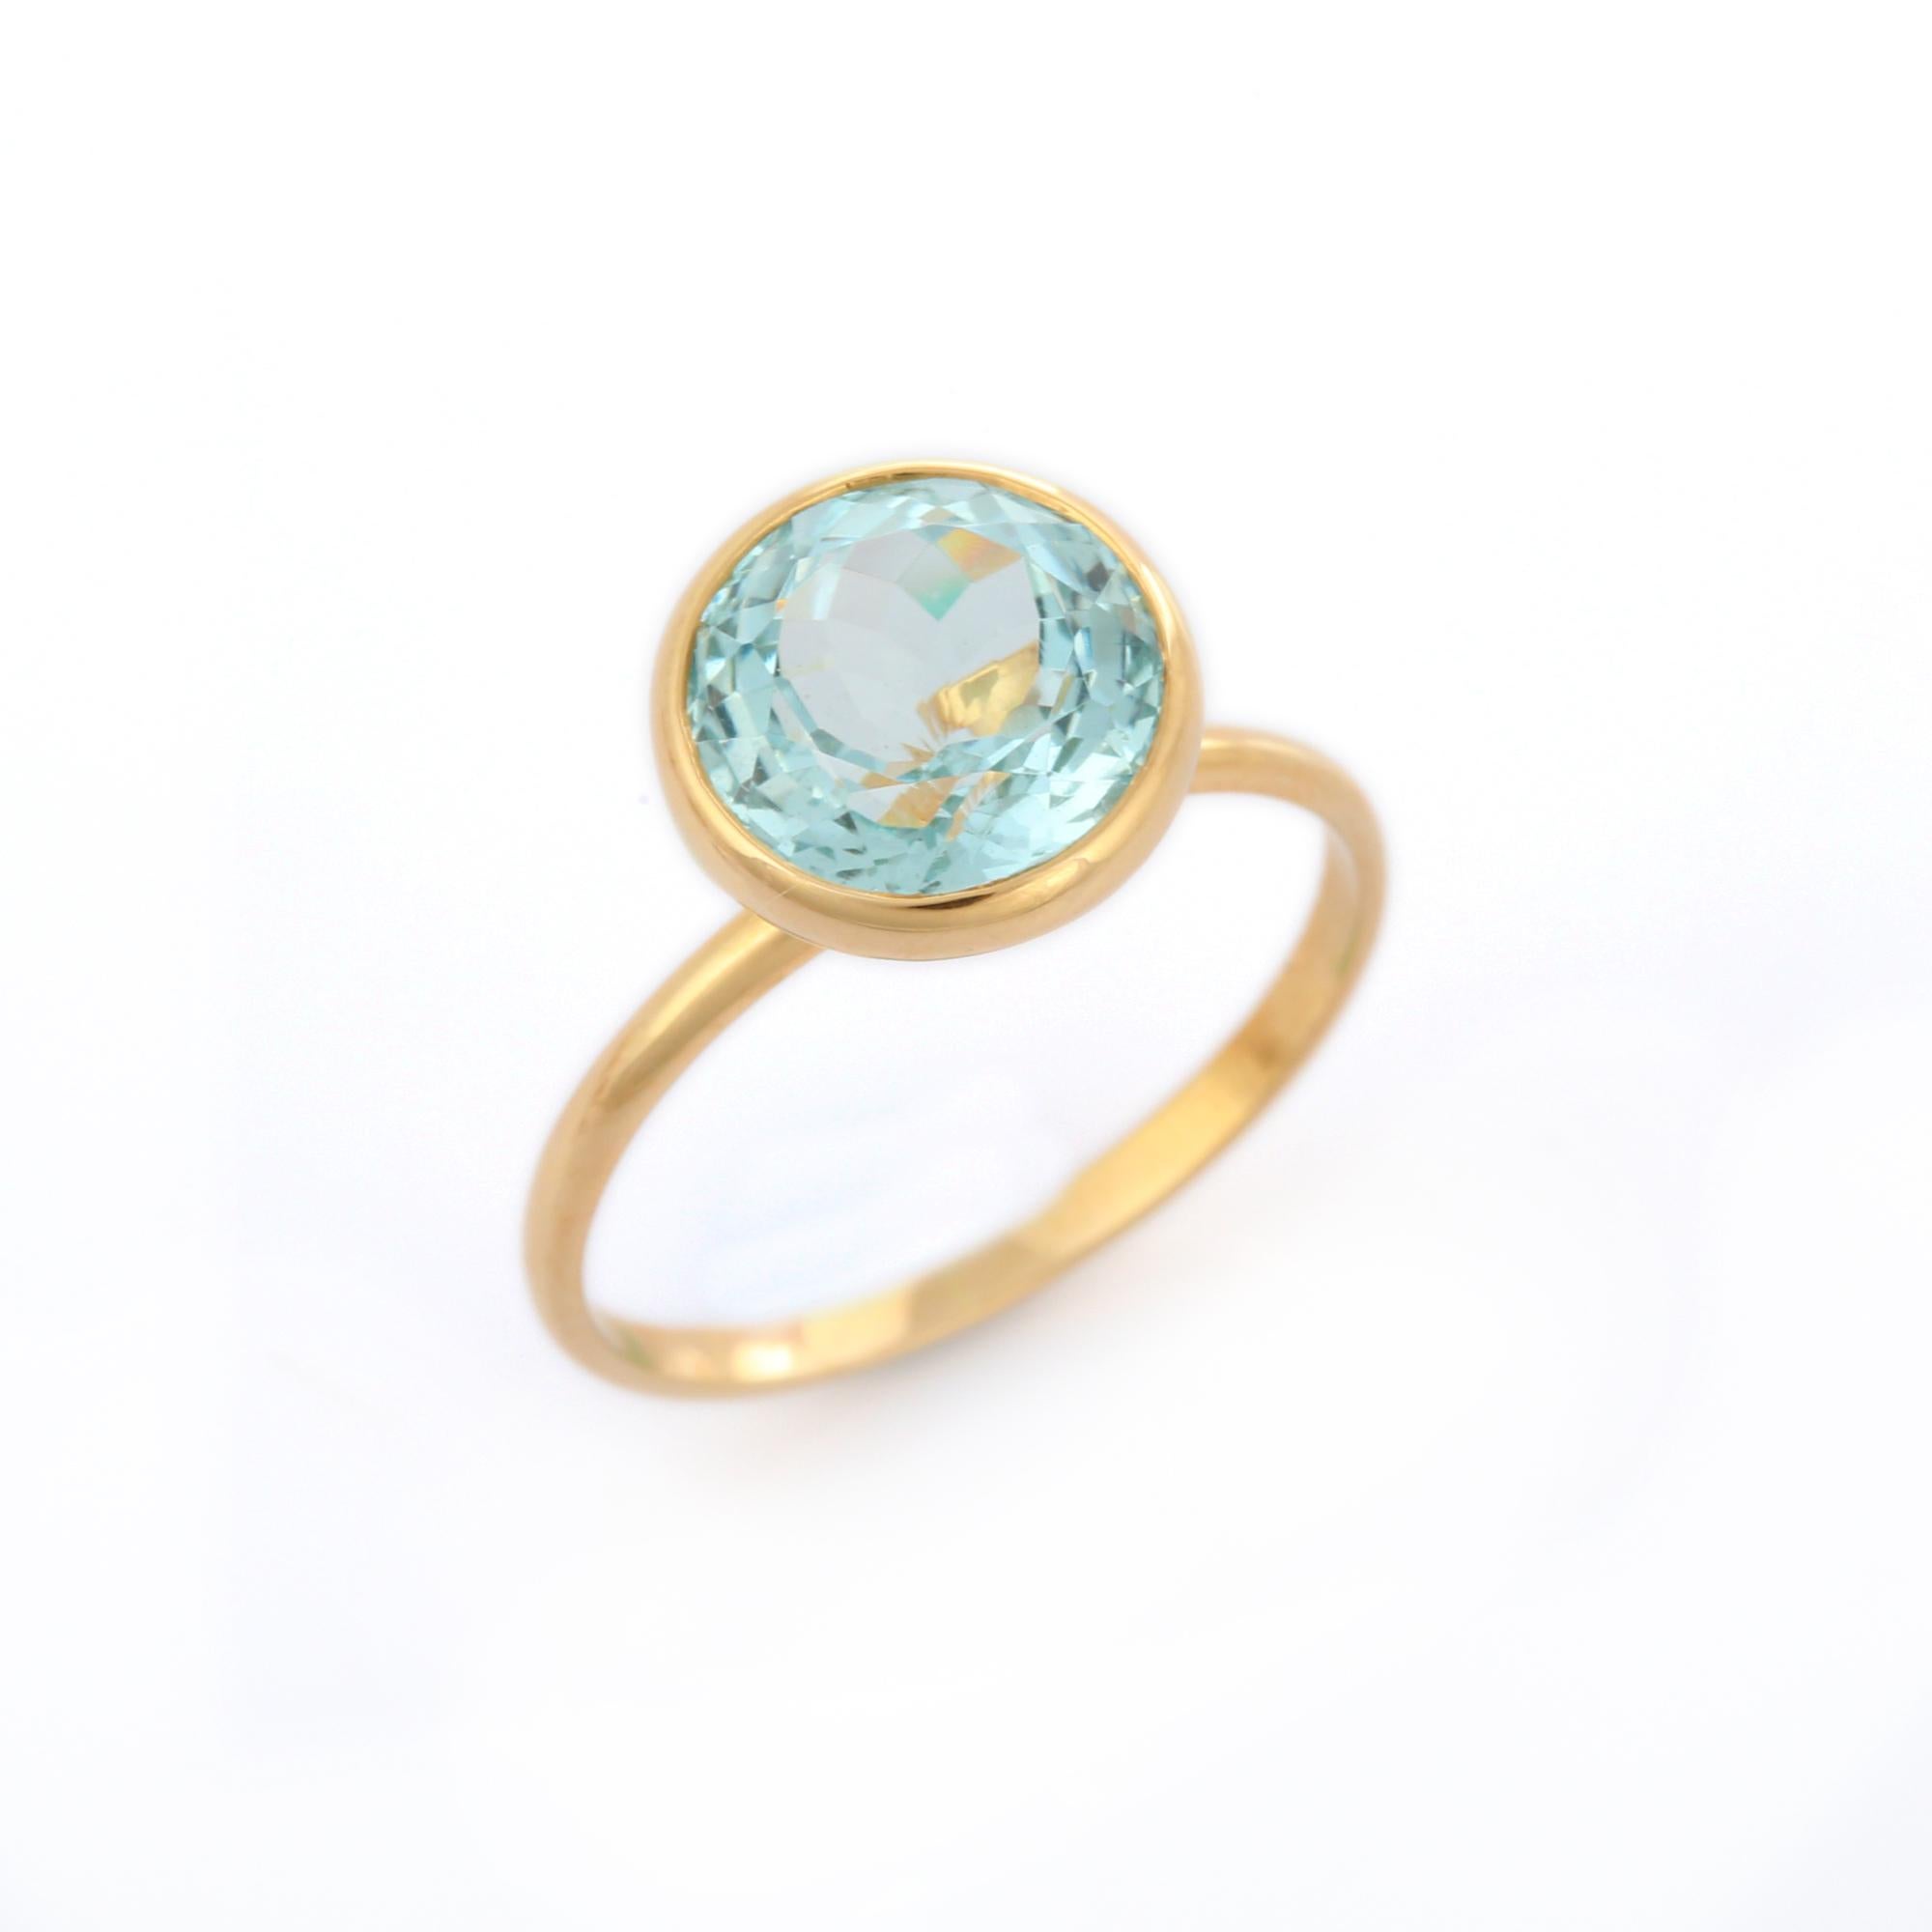 For Sale:  3.28 Carat Aquamarine Round Cut Cocktail Ring in 18K Yellow Gold